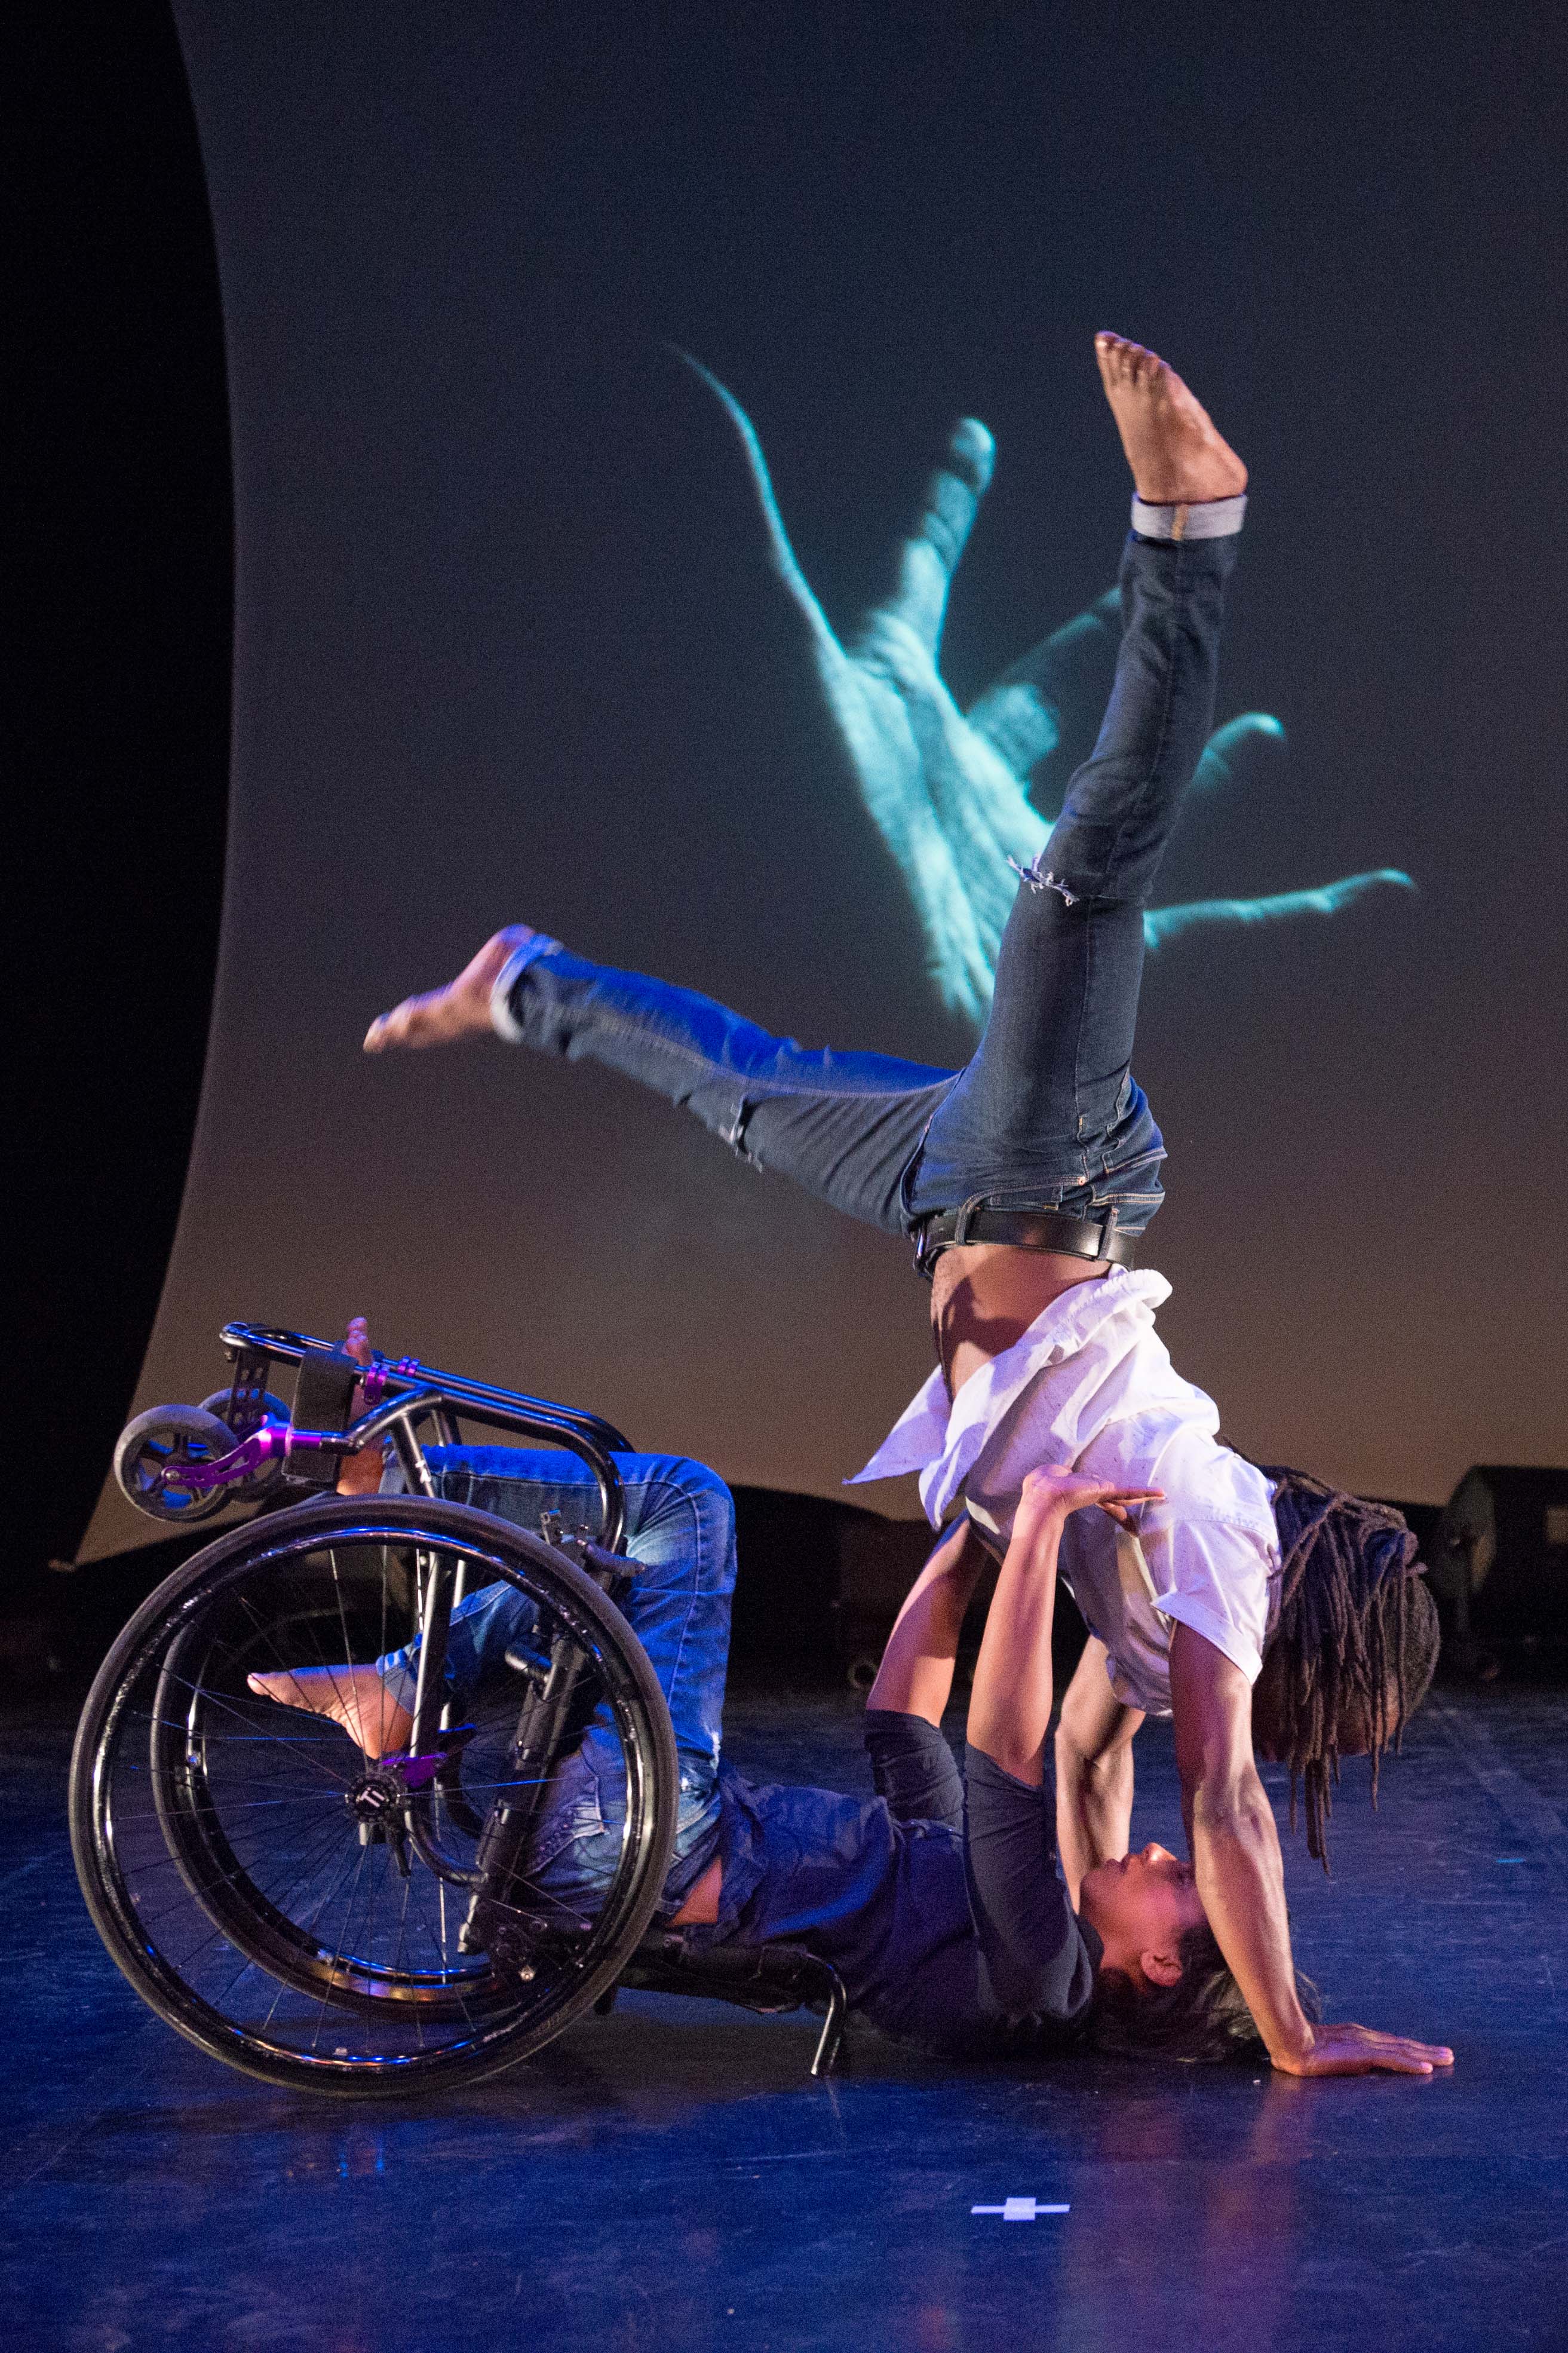 Dancer in jeans and white t-shirt carries dancer in wheelchair held sideways towards a screen showing a large image of a hand in teal